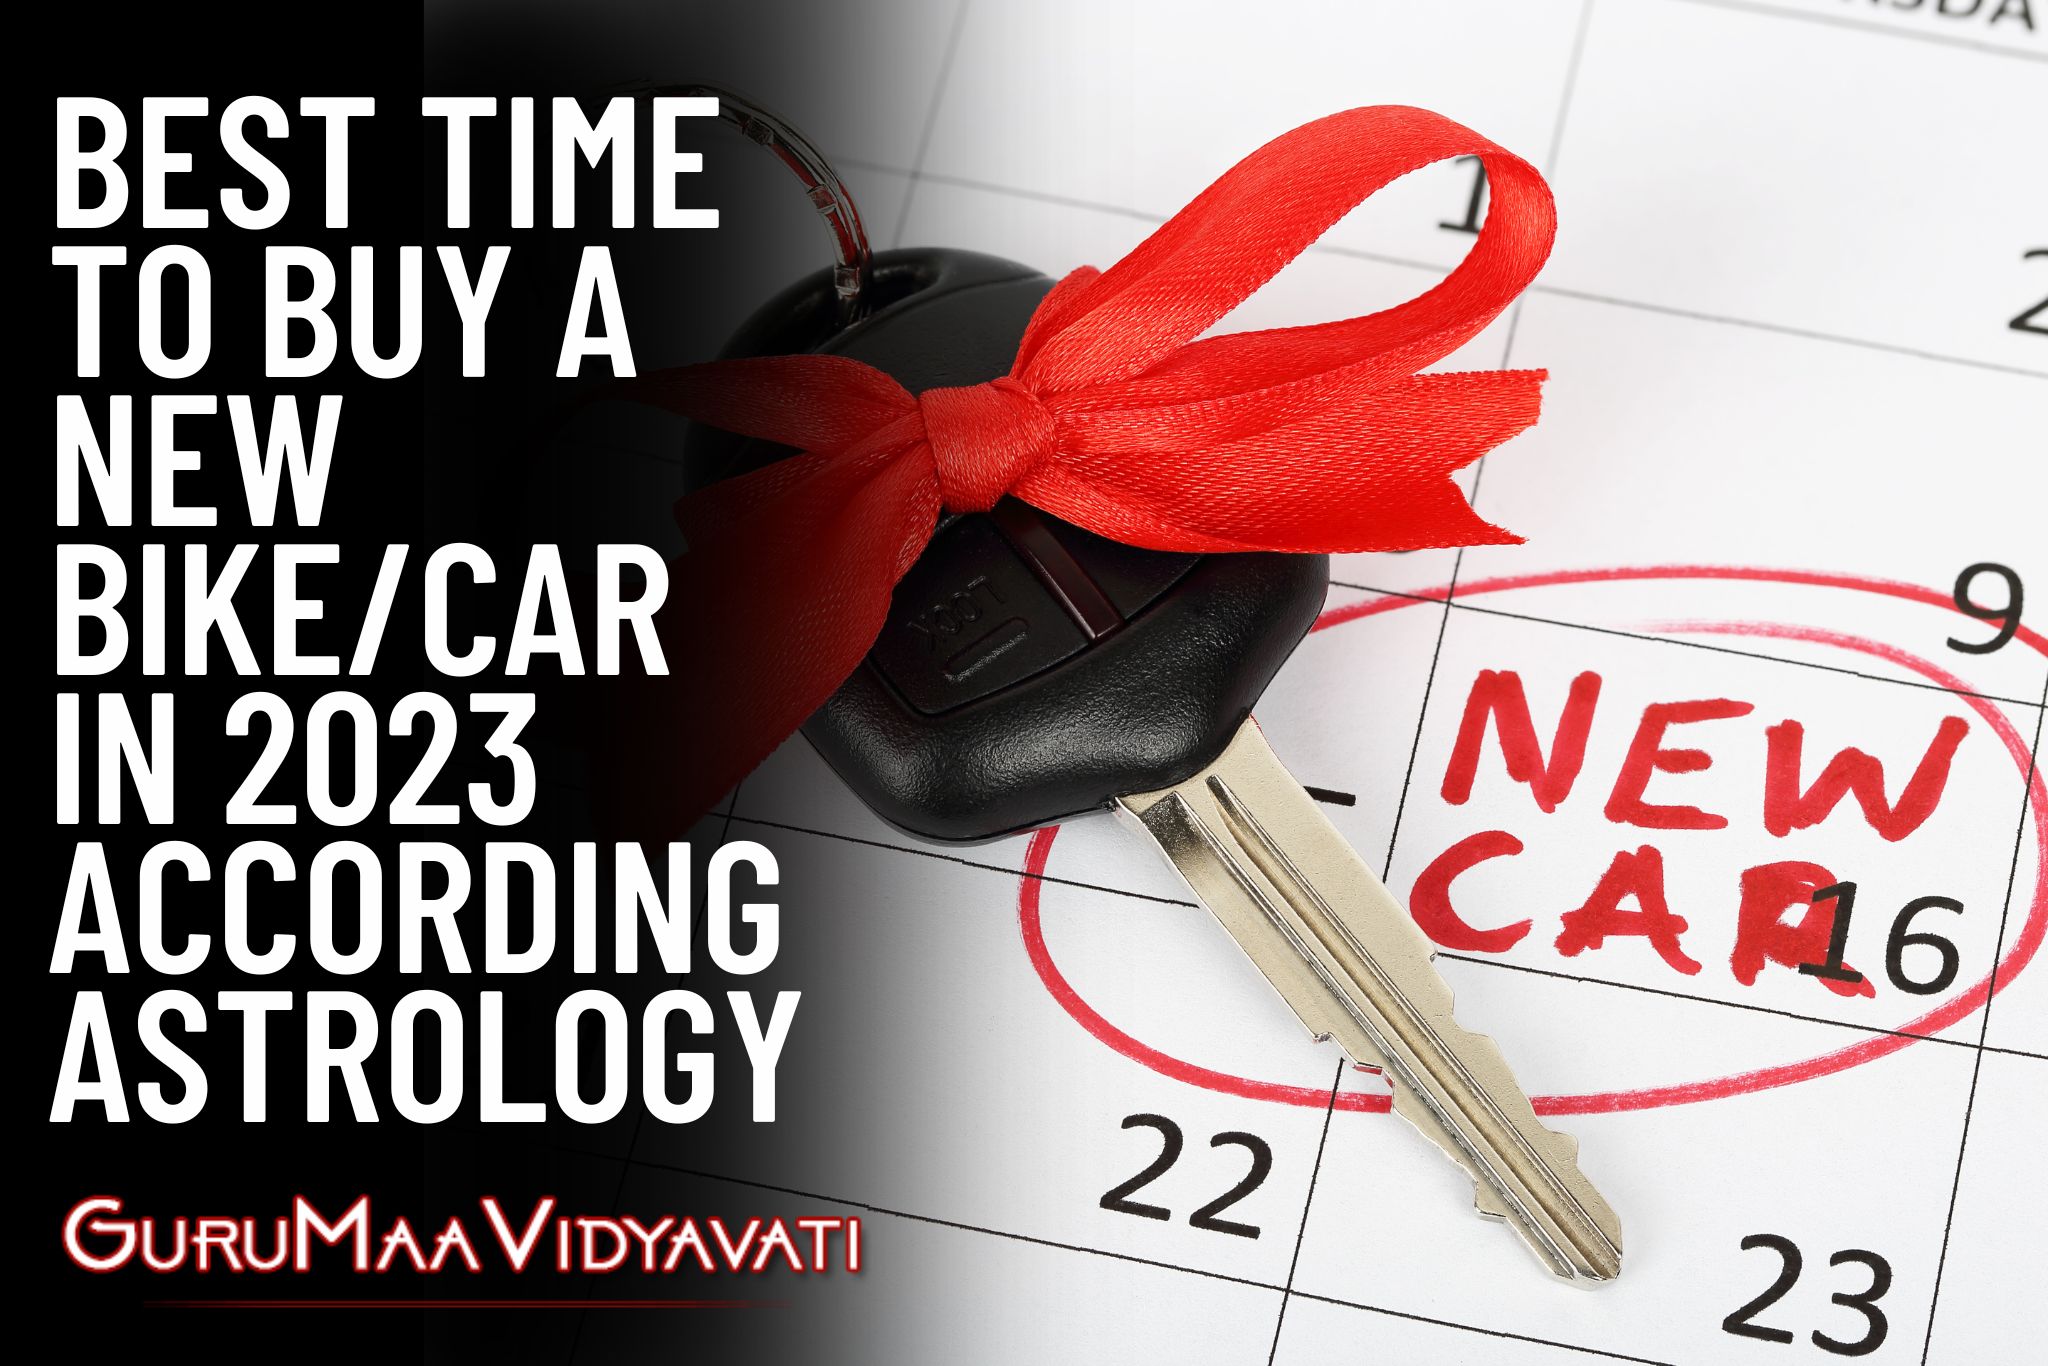 Best Time To Buy A New Bike/Car In 2023 According To Astrology